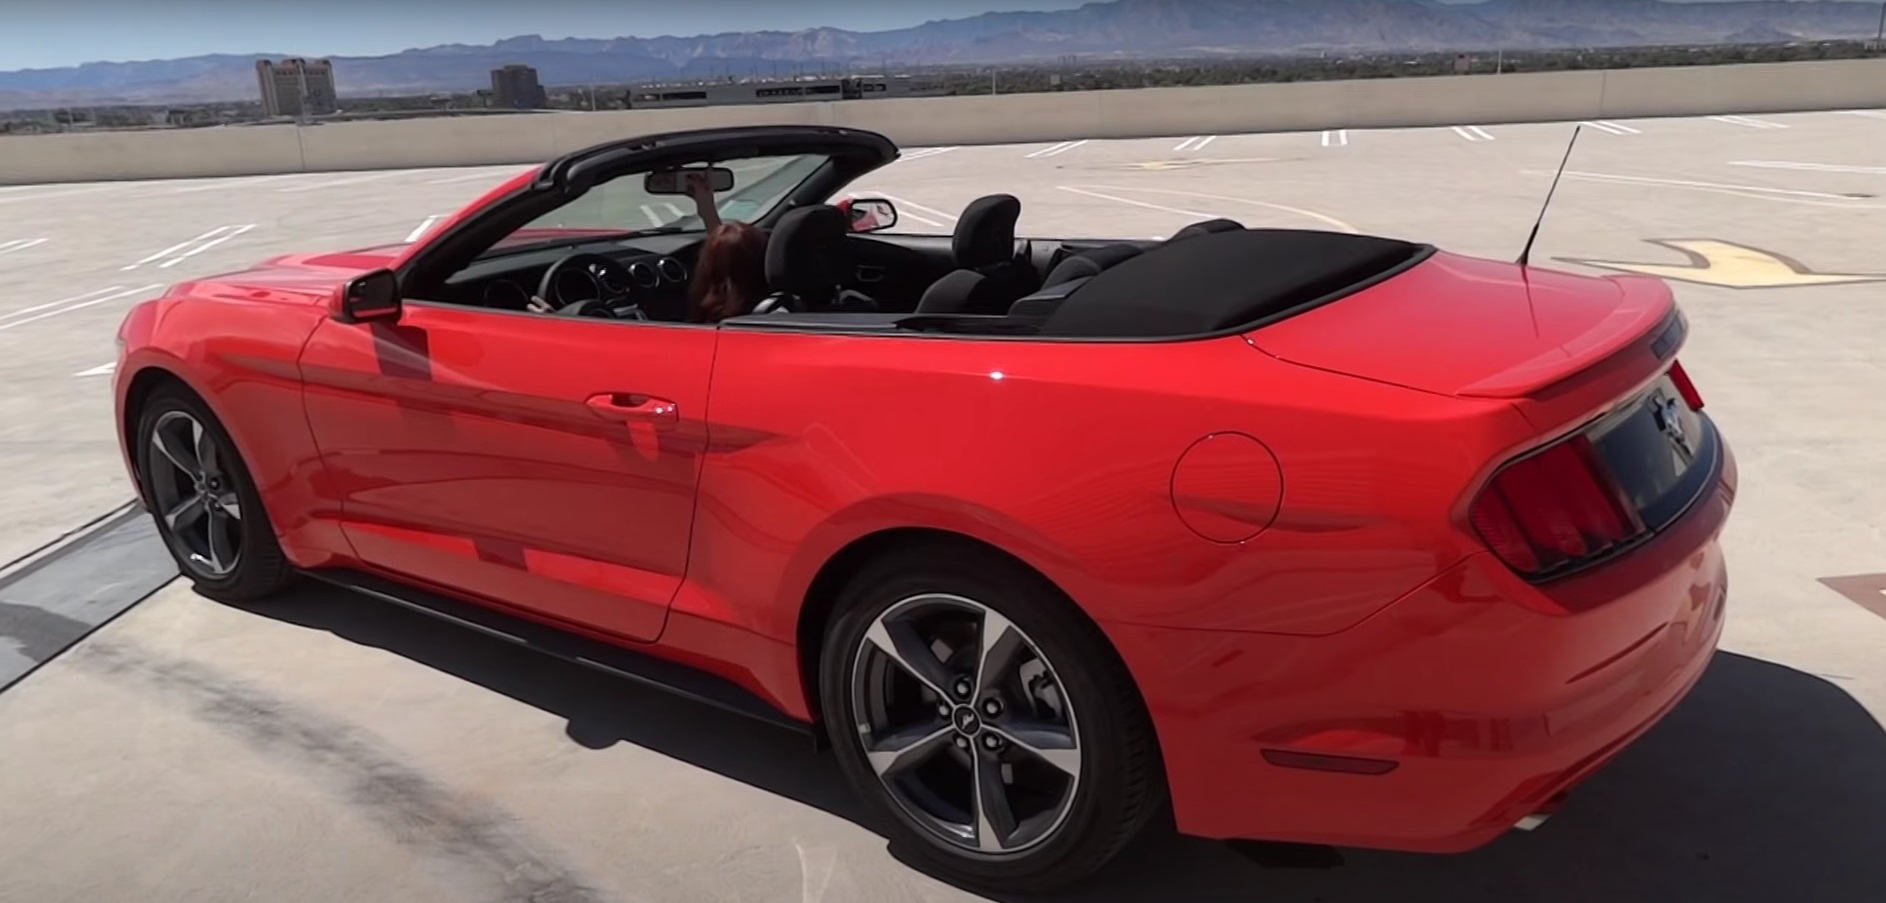 Video: 2015 Ford Mustang EcoBoost Convertible - Soft Top Open/Close